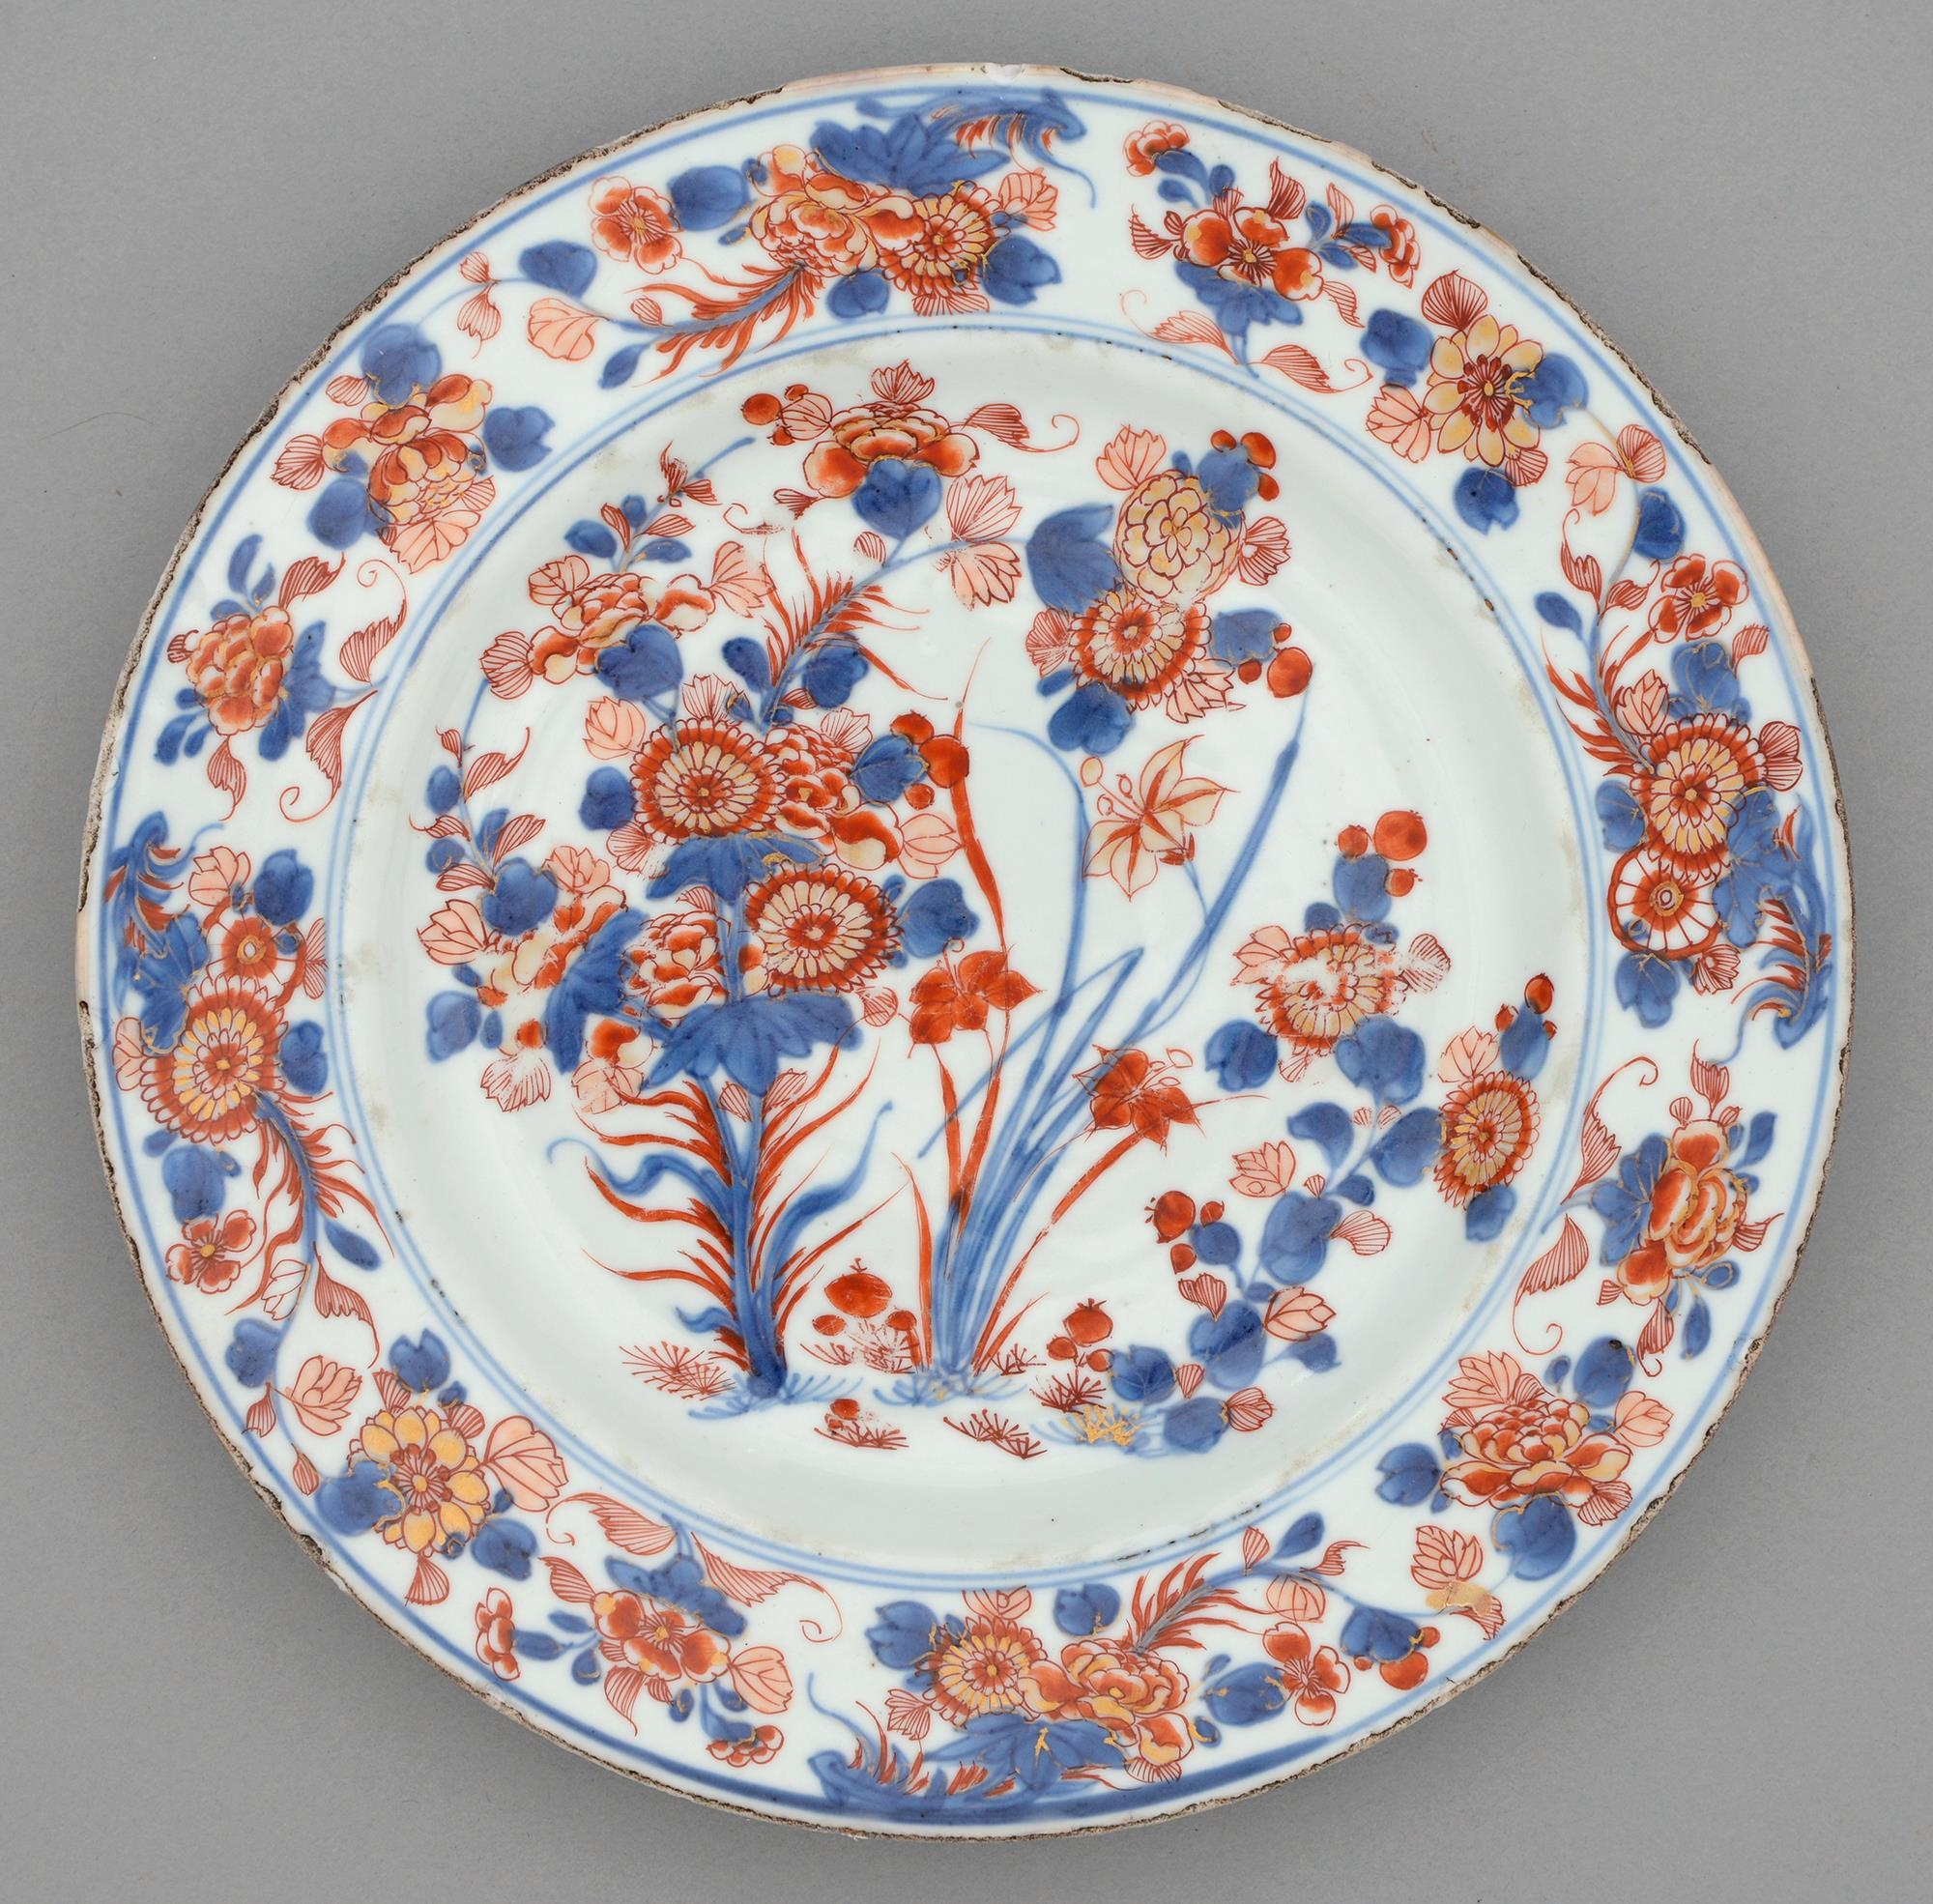 A Chinese Imari plate, 18th c, painted with three clumps of flowering plants bordered by trailing